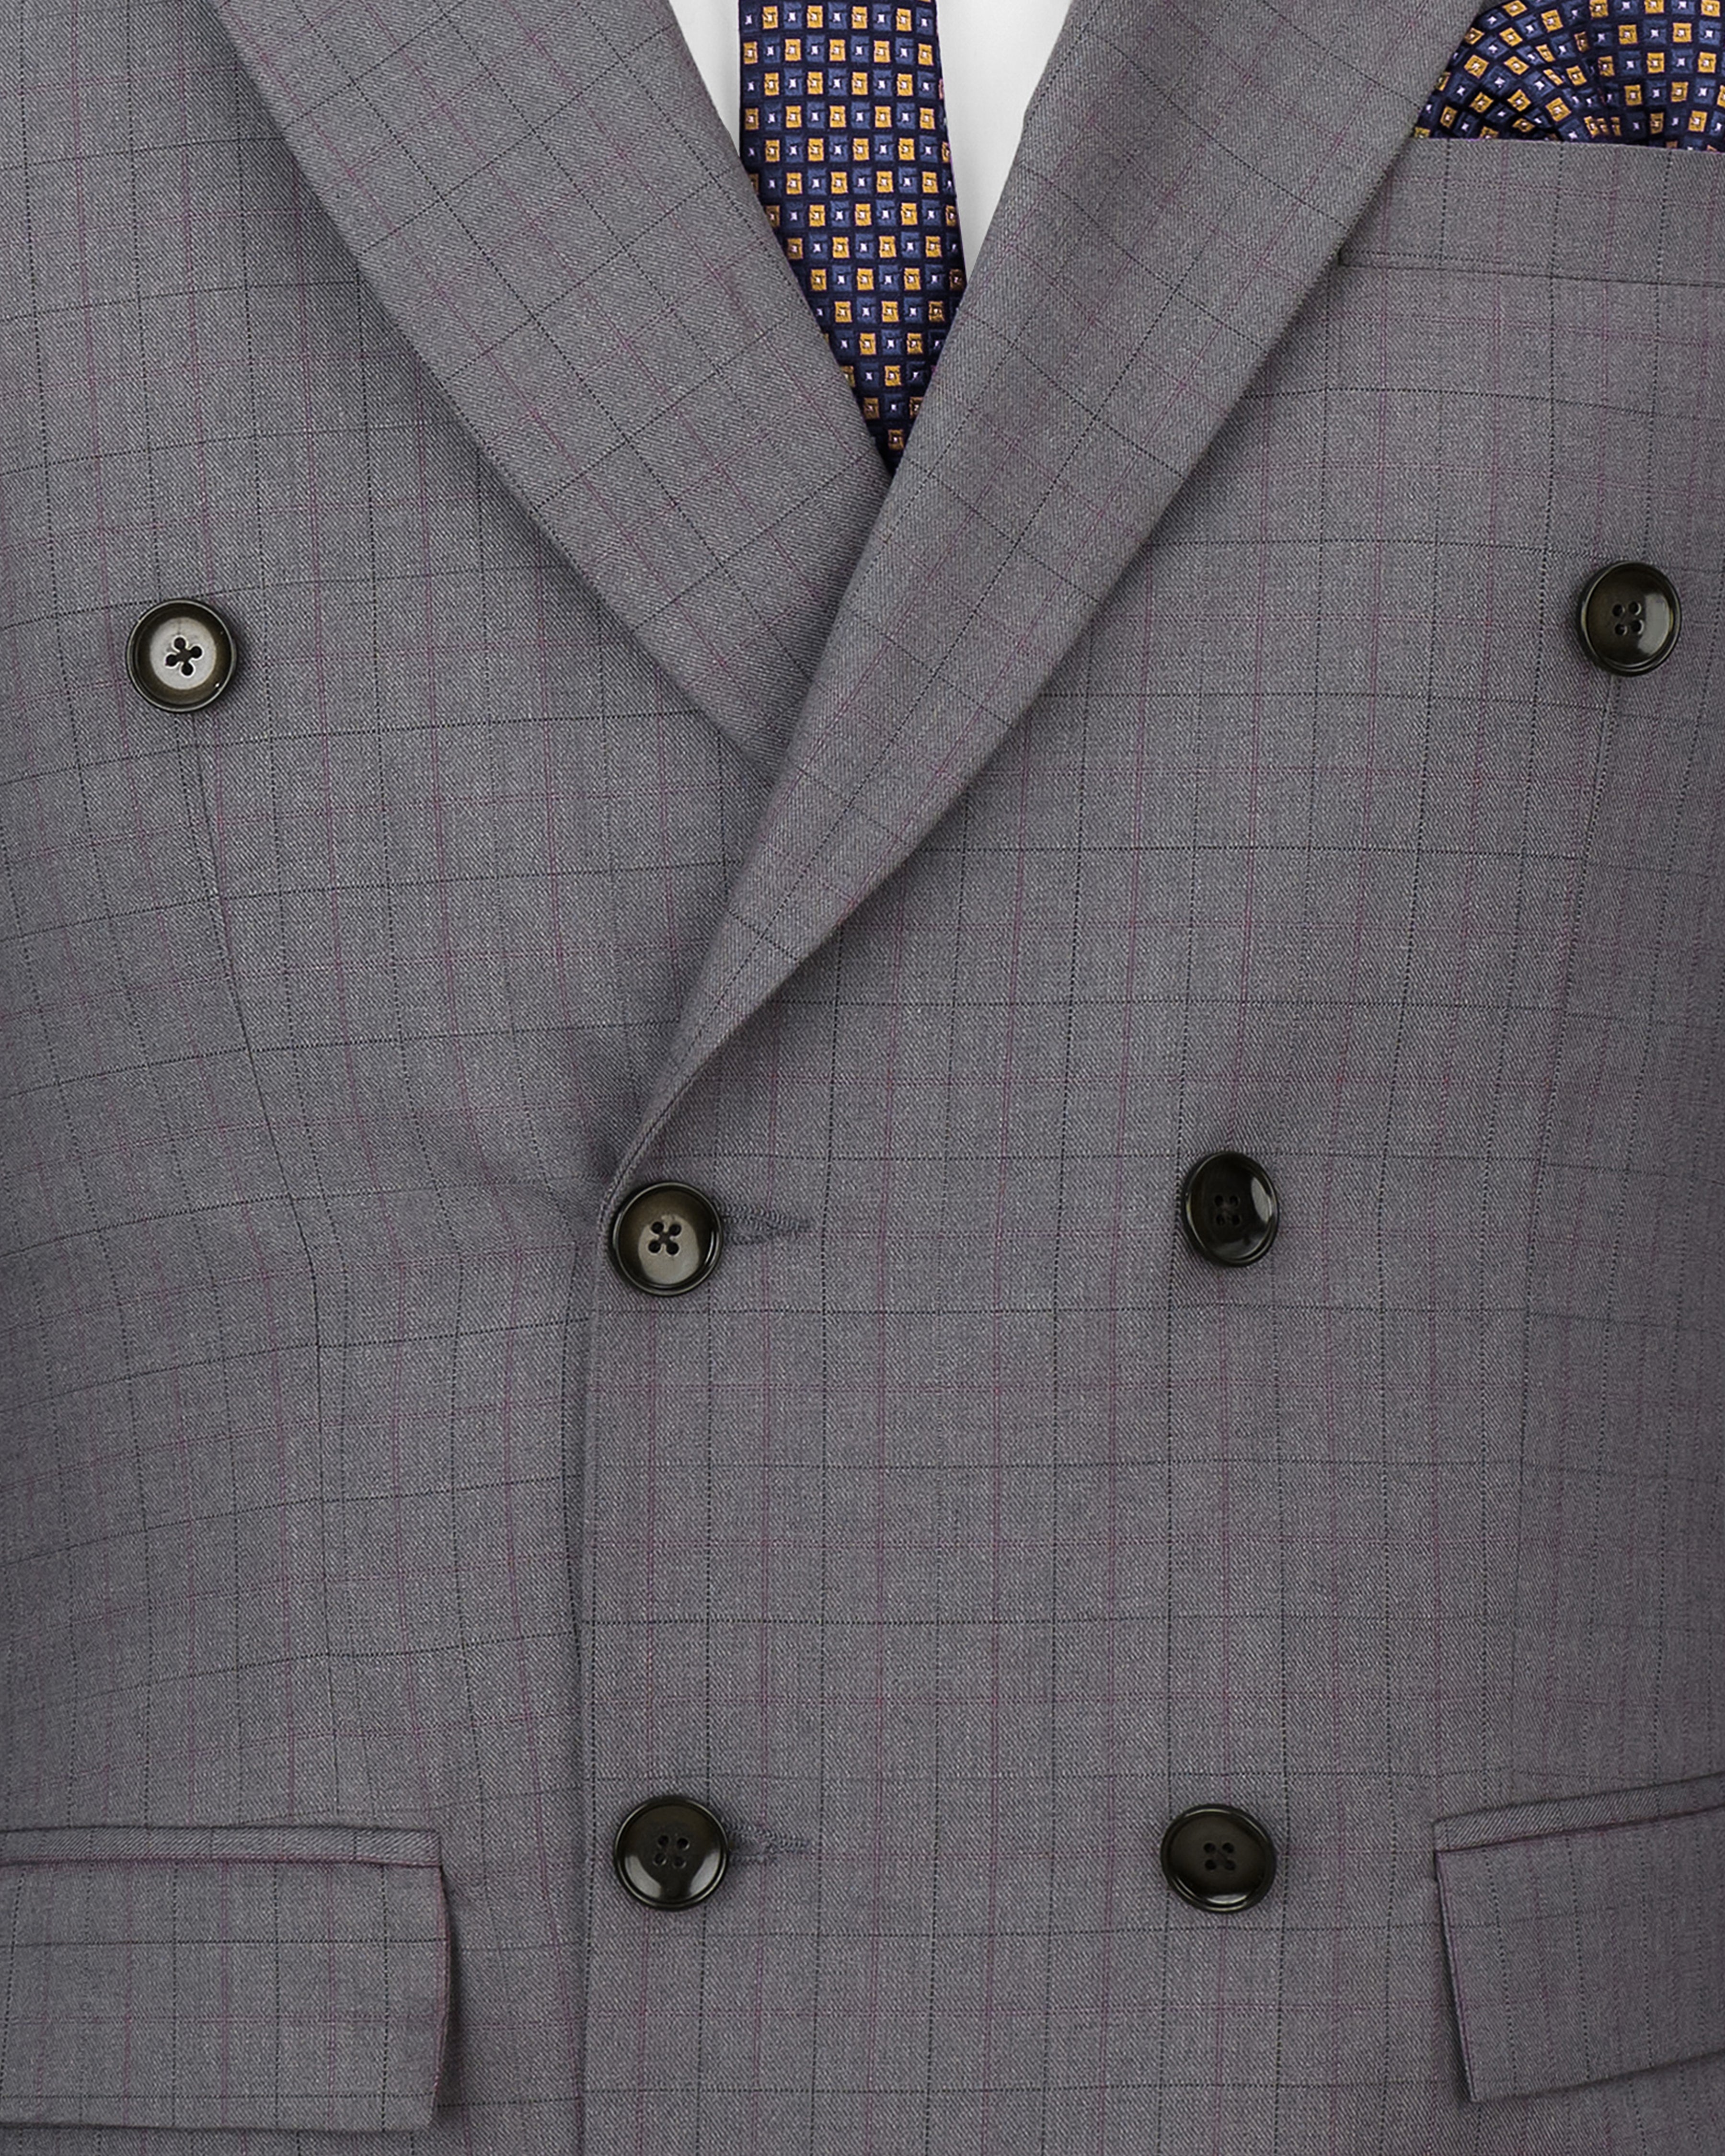 Storm Dust Gray Plaid Double Breasted Blazer BL2477-DB-36, BL2477-DB-38, BL2477-DB-40, BL2477-DB-42, BL2477-DB-44, BL2477-DB-46, BL2477-DB-48, BL2477-DB-50, BL2477-DB-52, BL2477-DB-54, BL2477-DB-56, BL2477-DB-58, BL2477-DB-60